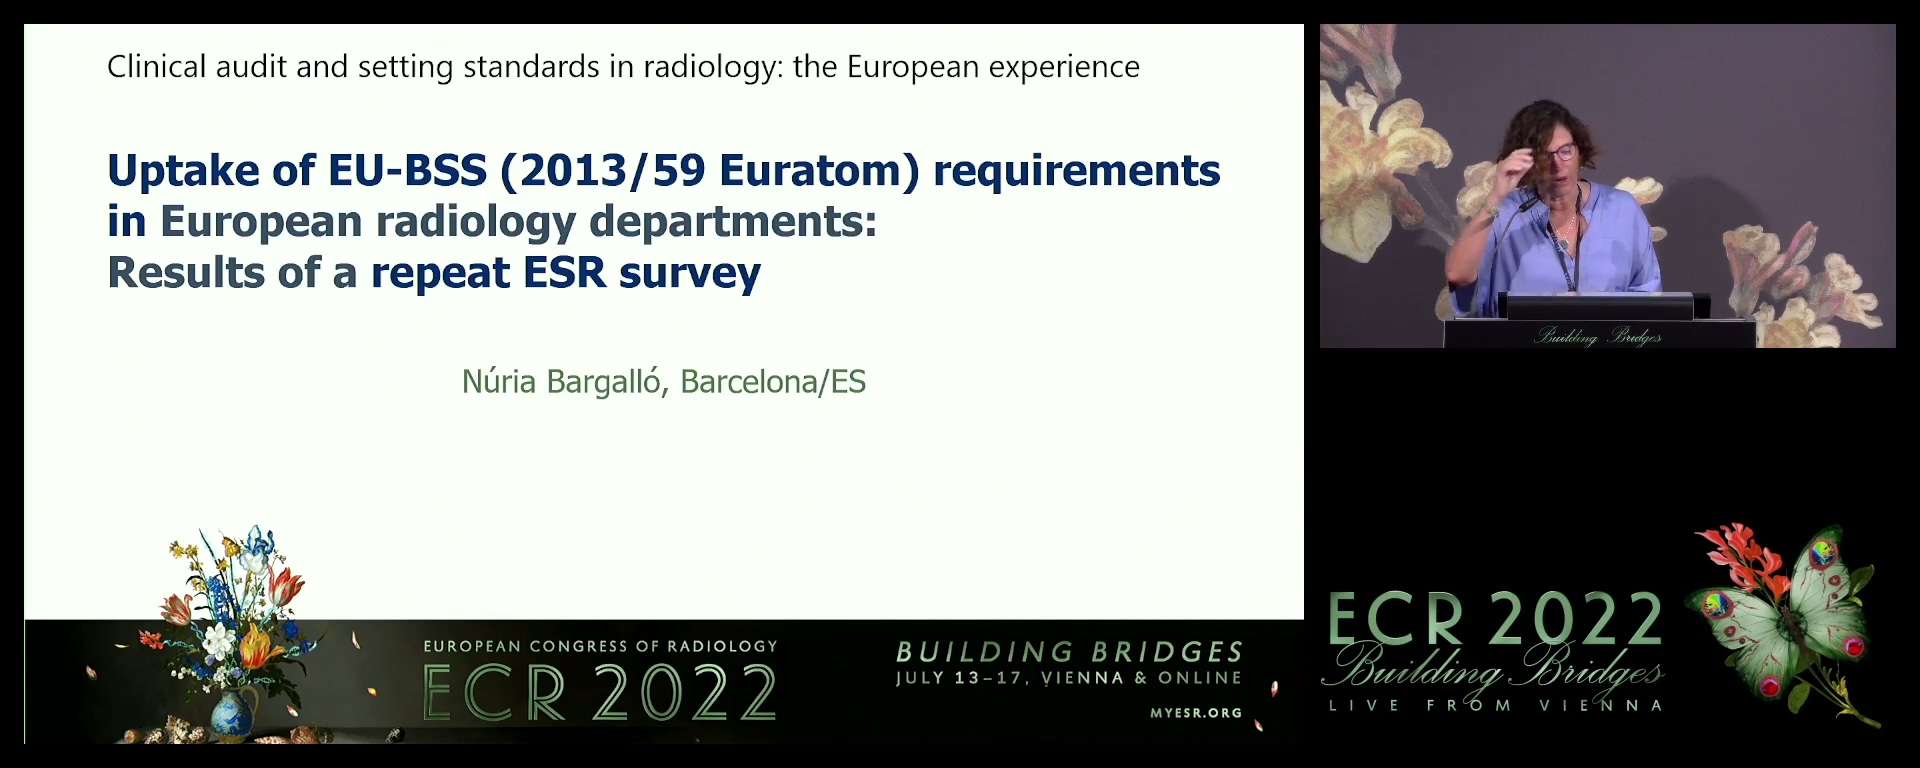 Uptake of EU-BSS (2013/59 Euratom) requirements in European radiology departments: results of a repeat ESR survey